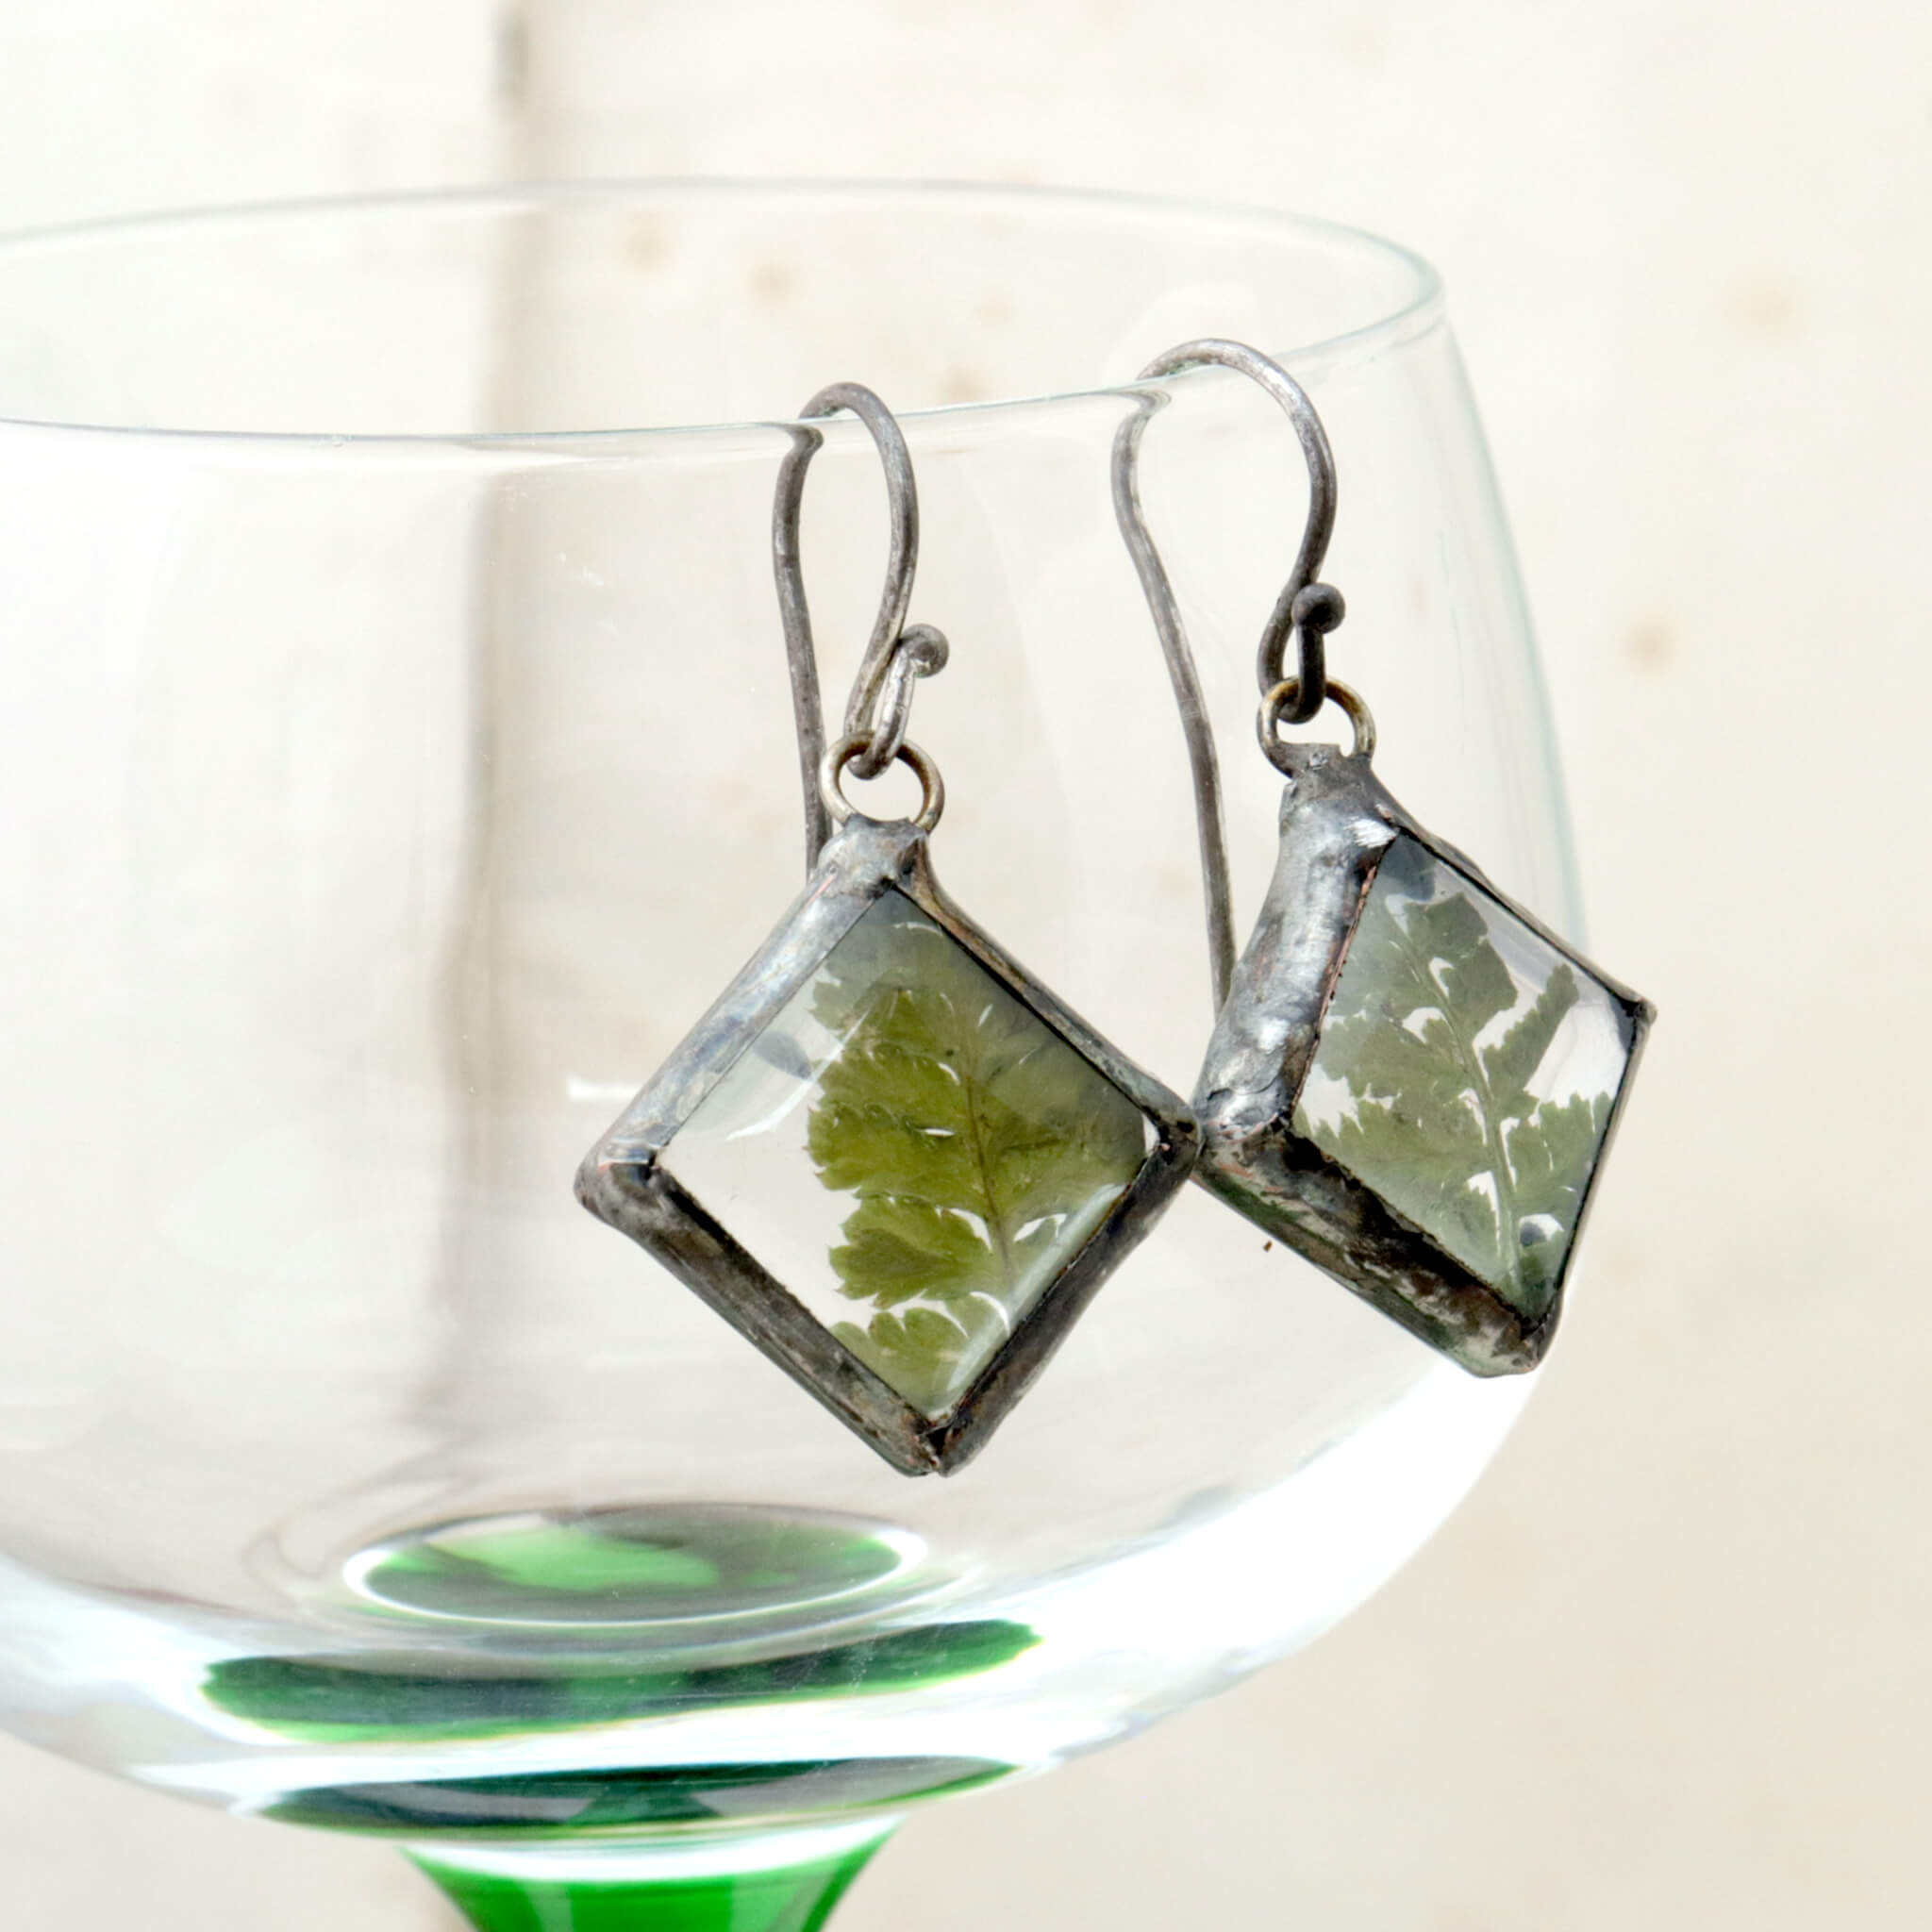 Earrings with real fern hanging on an edge of wine glass